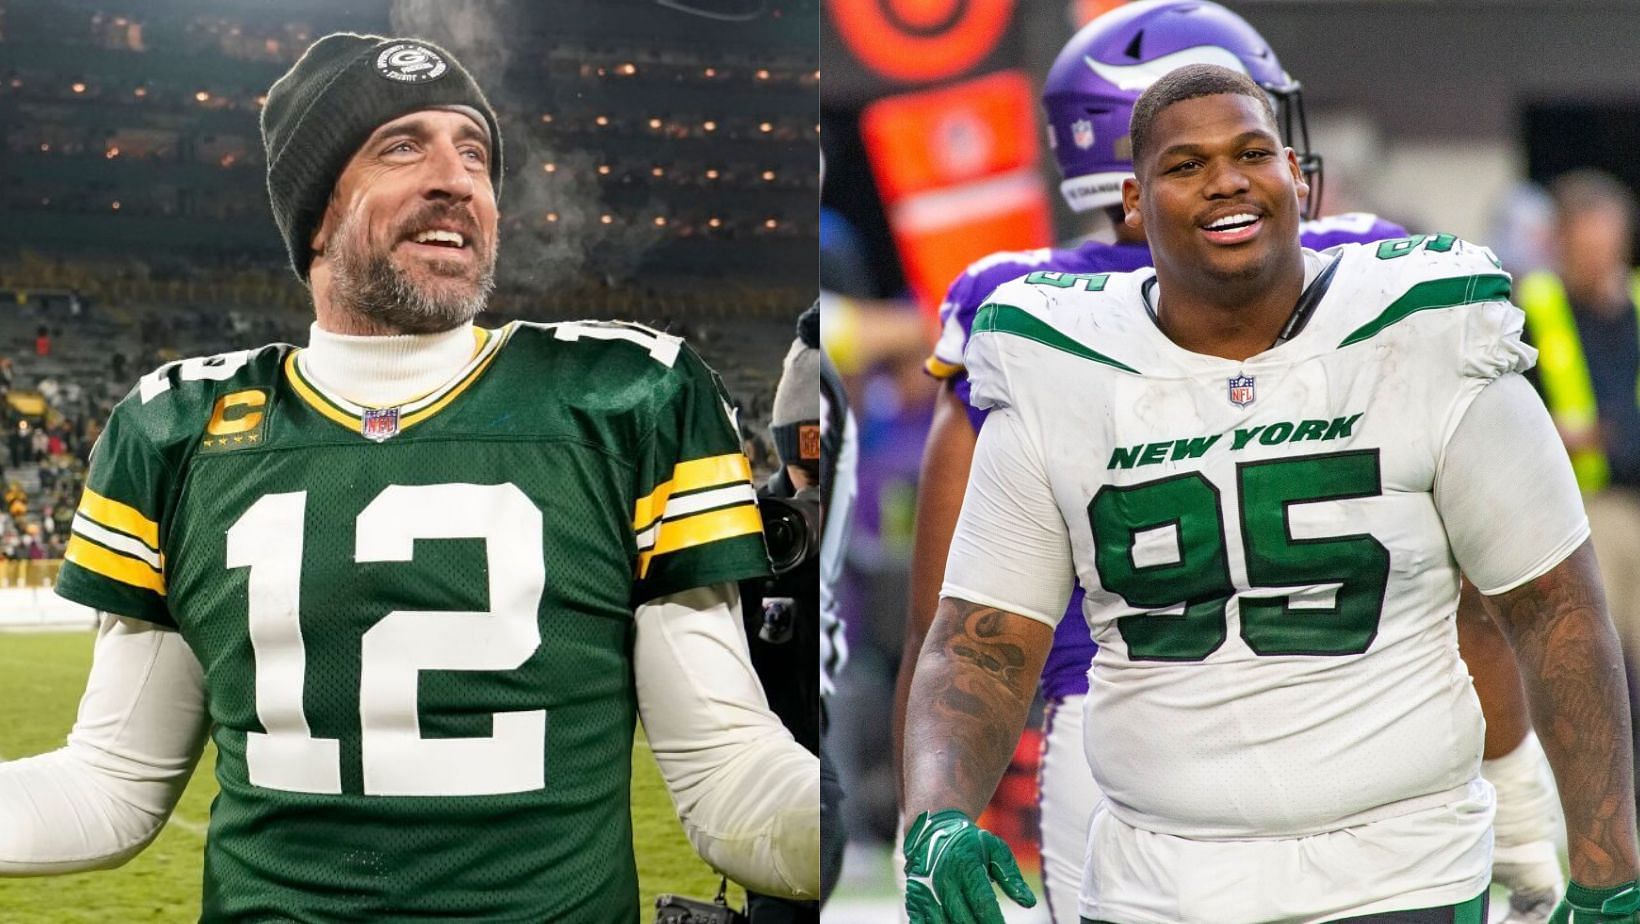 Are the Jets waiting for Rodgers to be their Savior? According to Williams, yes